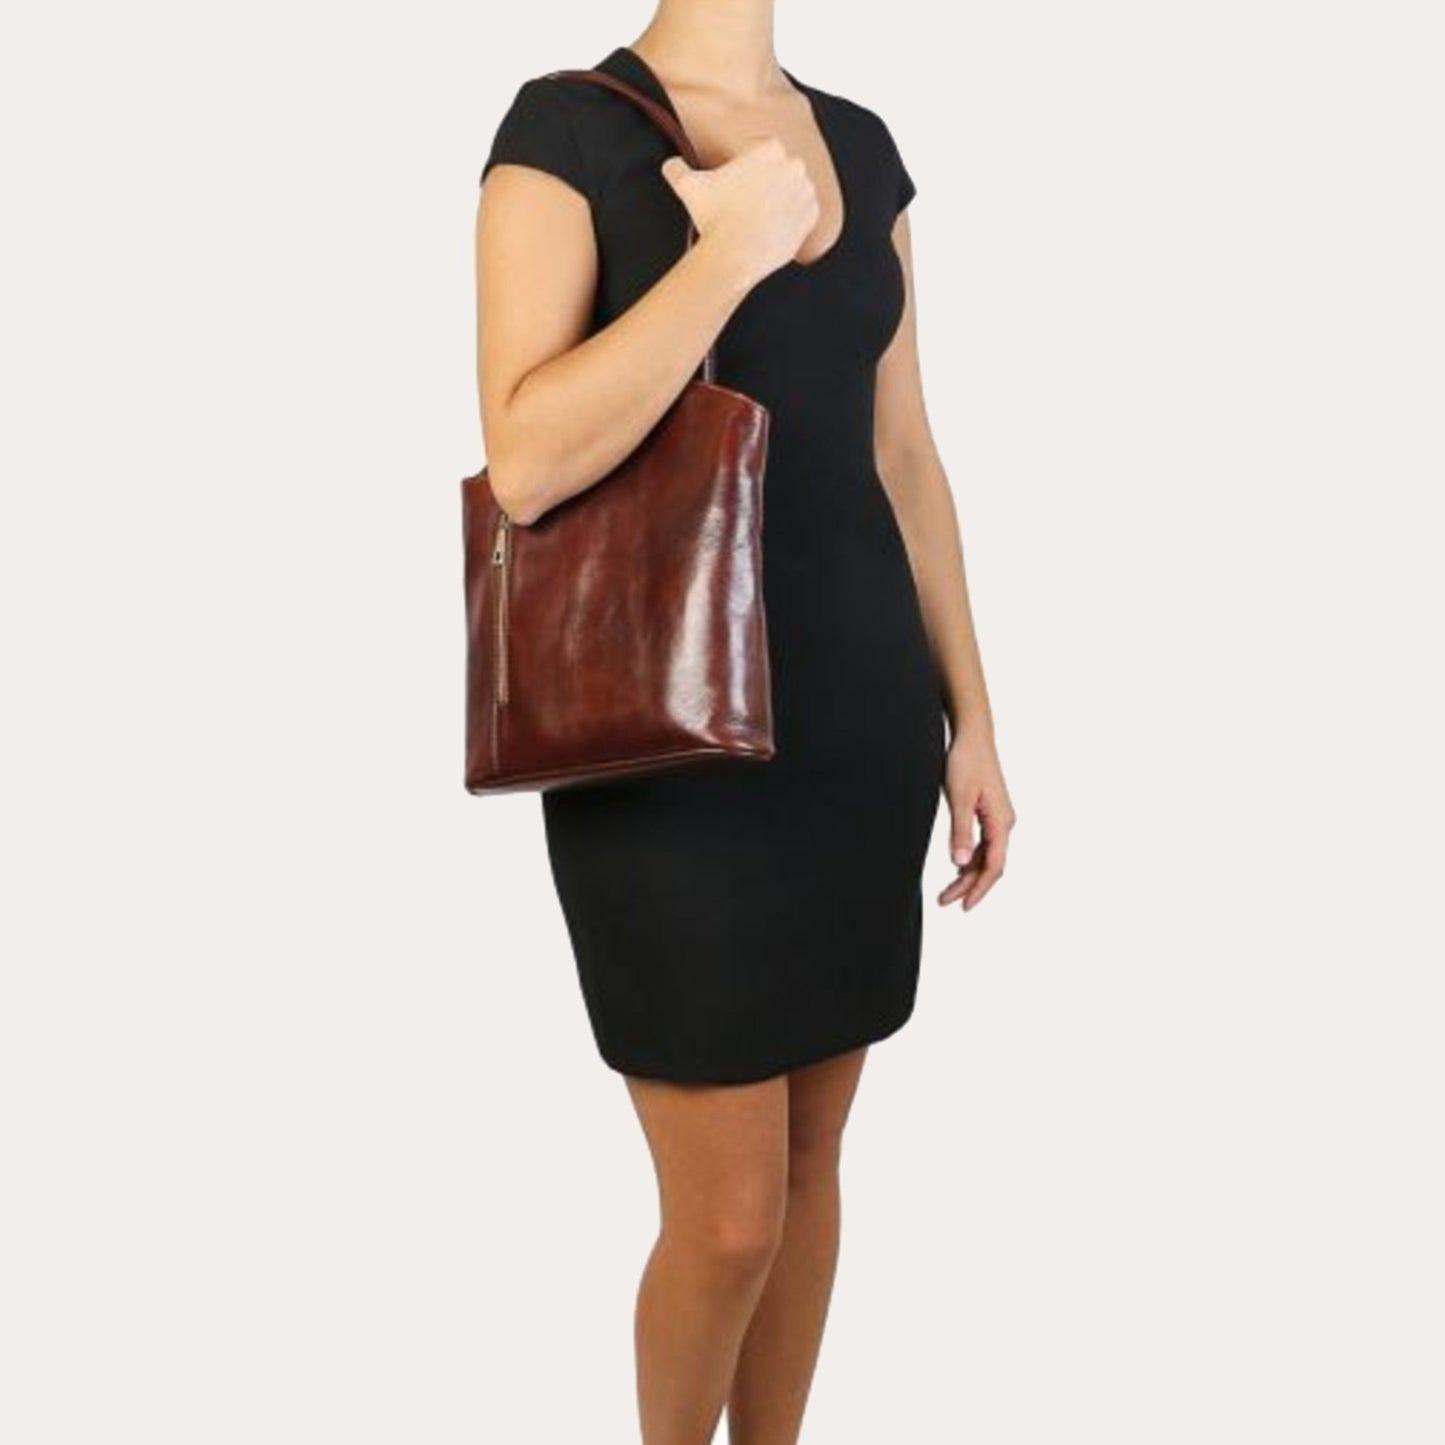 Tuscany Leather Black Leather Convertible Bag